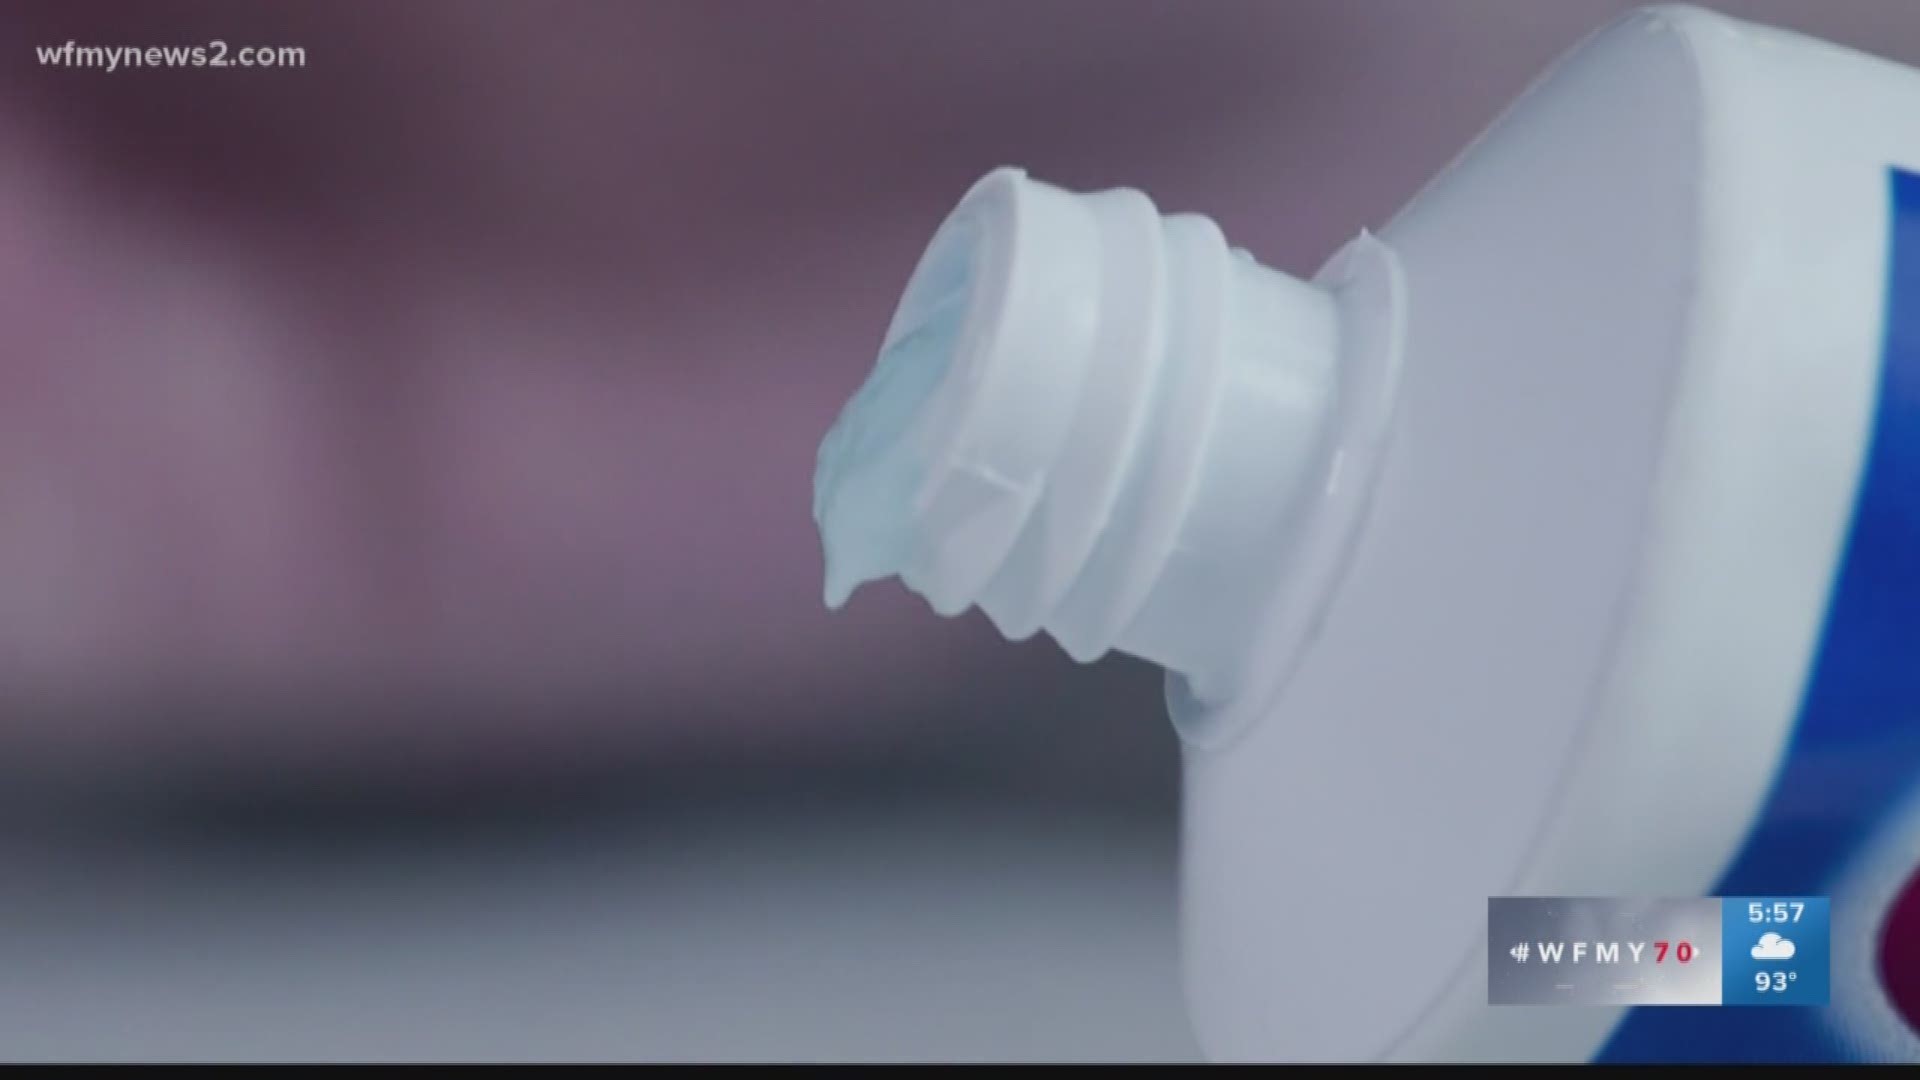 Consumer Reports has a closer look at what’s actually in your toothpaste.